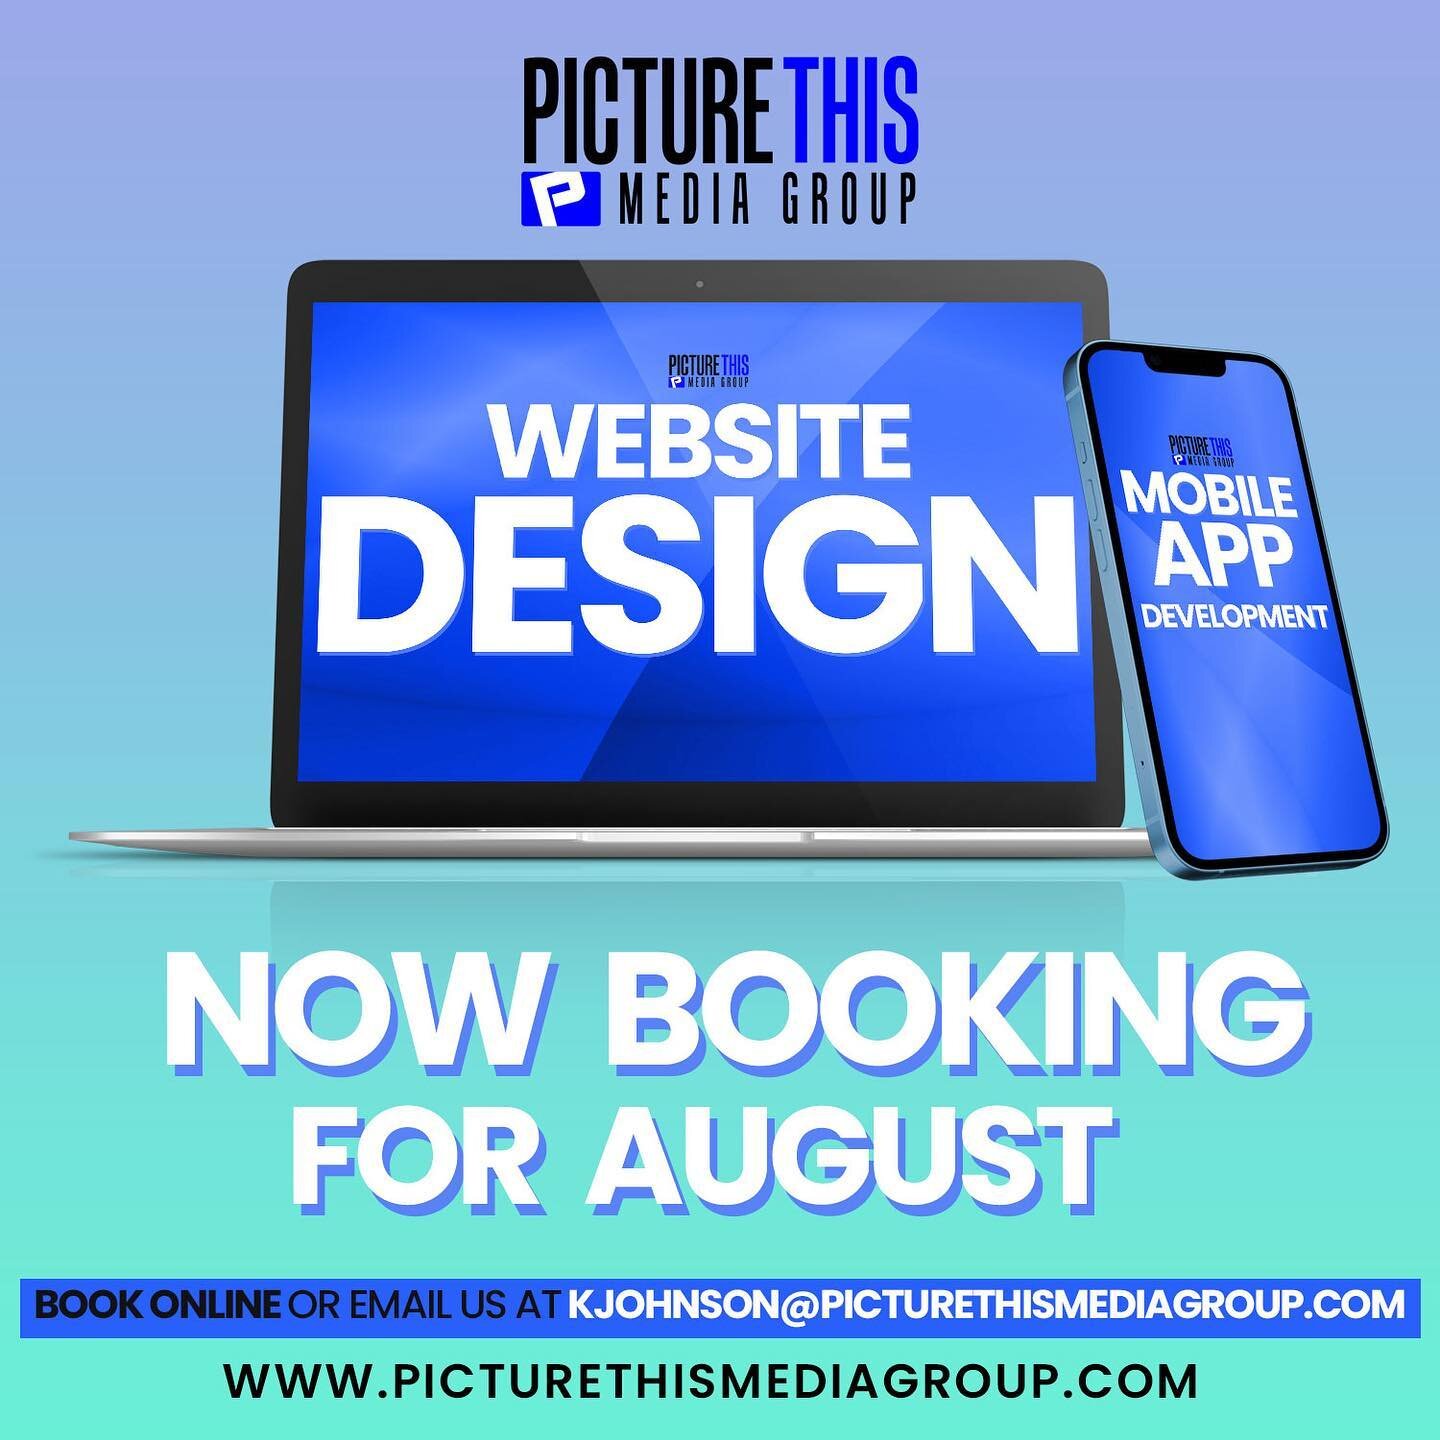 Our books are open for 💻Website Design and 📱Mobile App Development!
-
-
Book online or email us!
🖥www.picturethismediagroup.com
📧kjohnson@picturethismediagroup.com

#webdesign #website #websitedesign #picturethismediagroup #appdevelopment #mobile